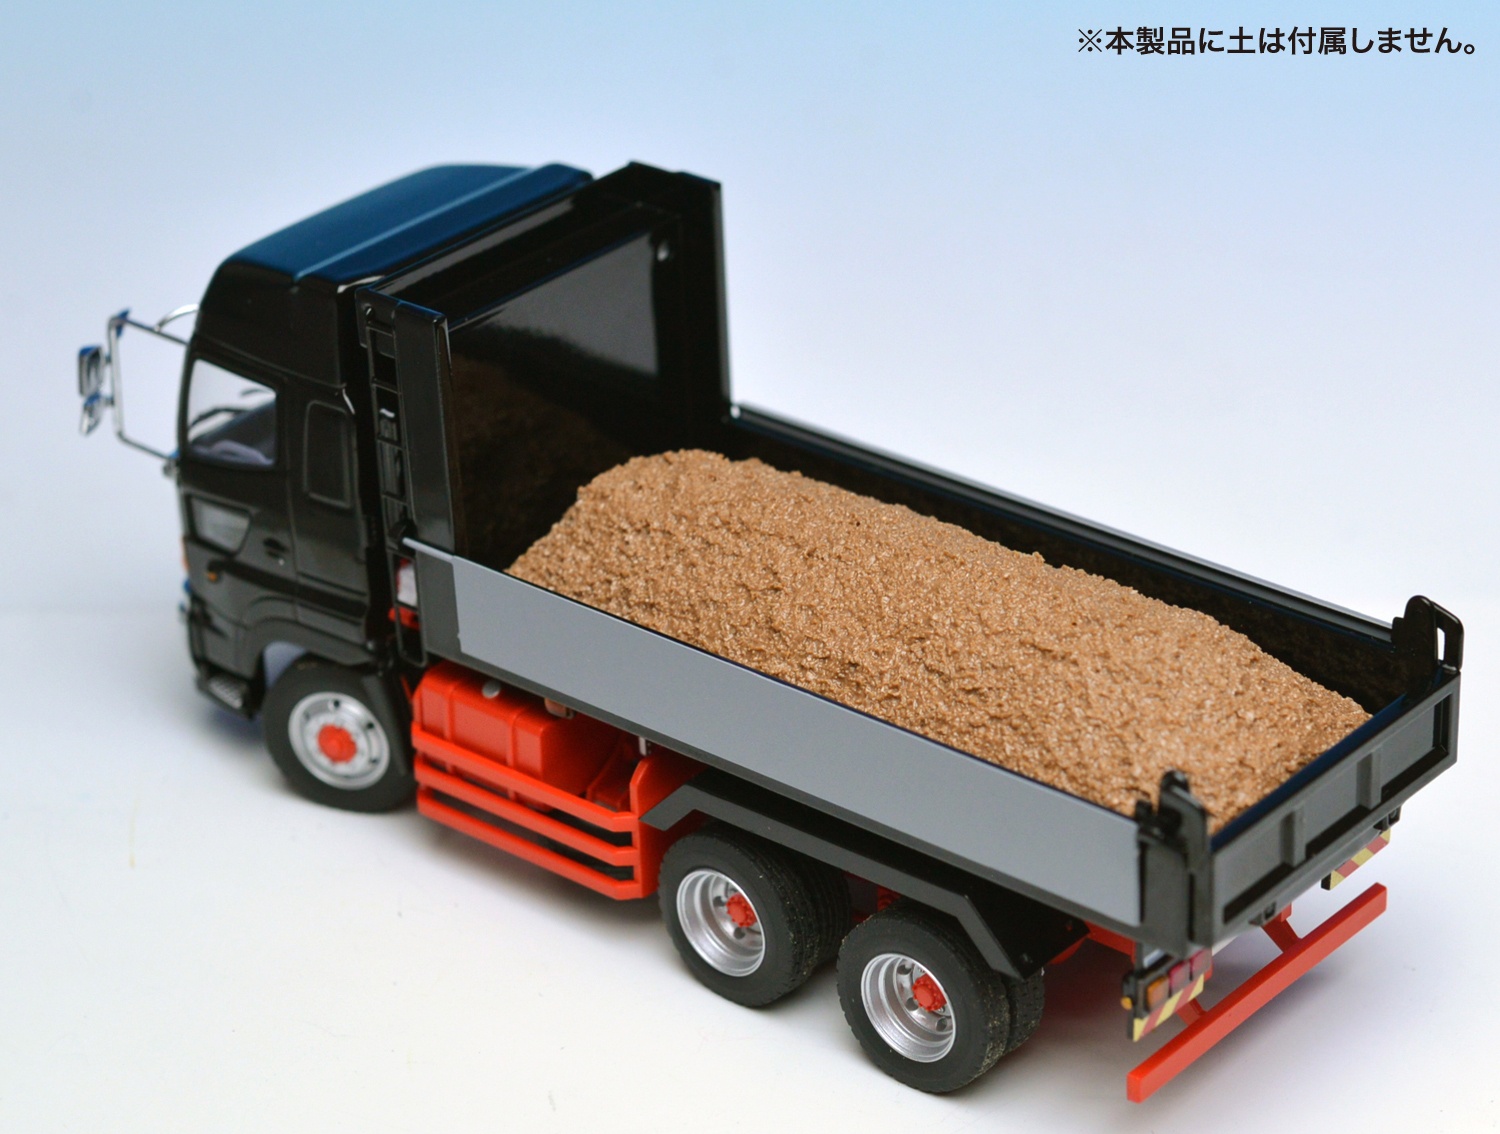 1/50 Hino Profia FS 6x4 Dump Truck Black Cab Over High Roof (Red Chassis +  Plated)